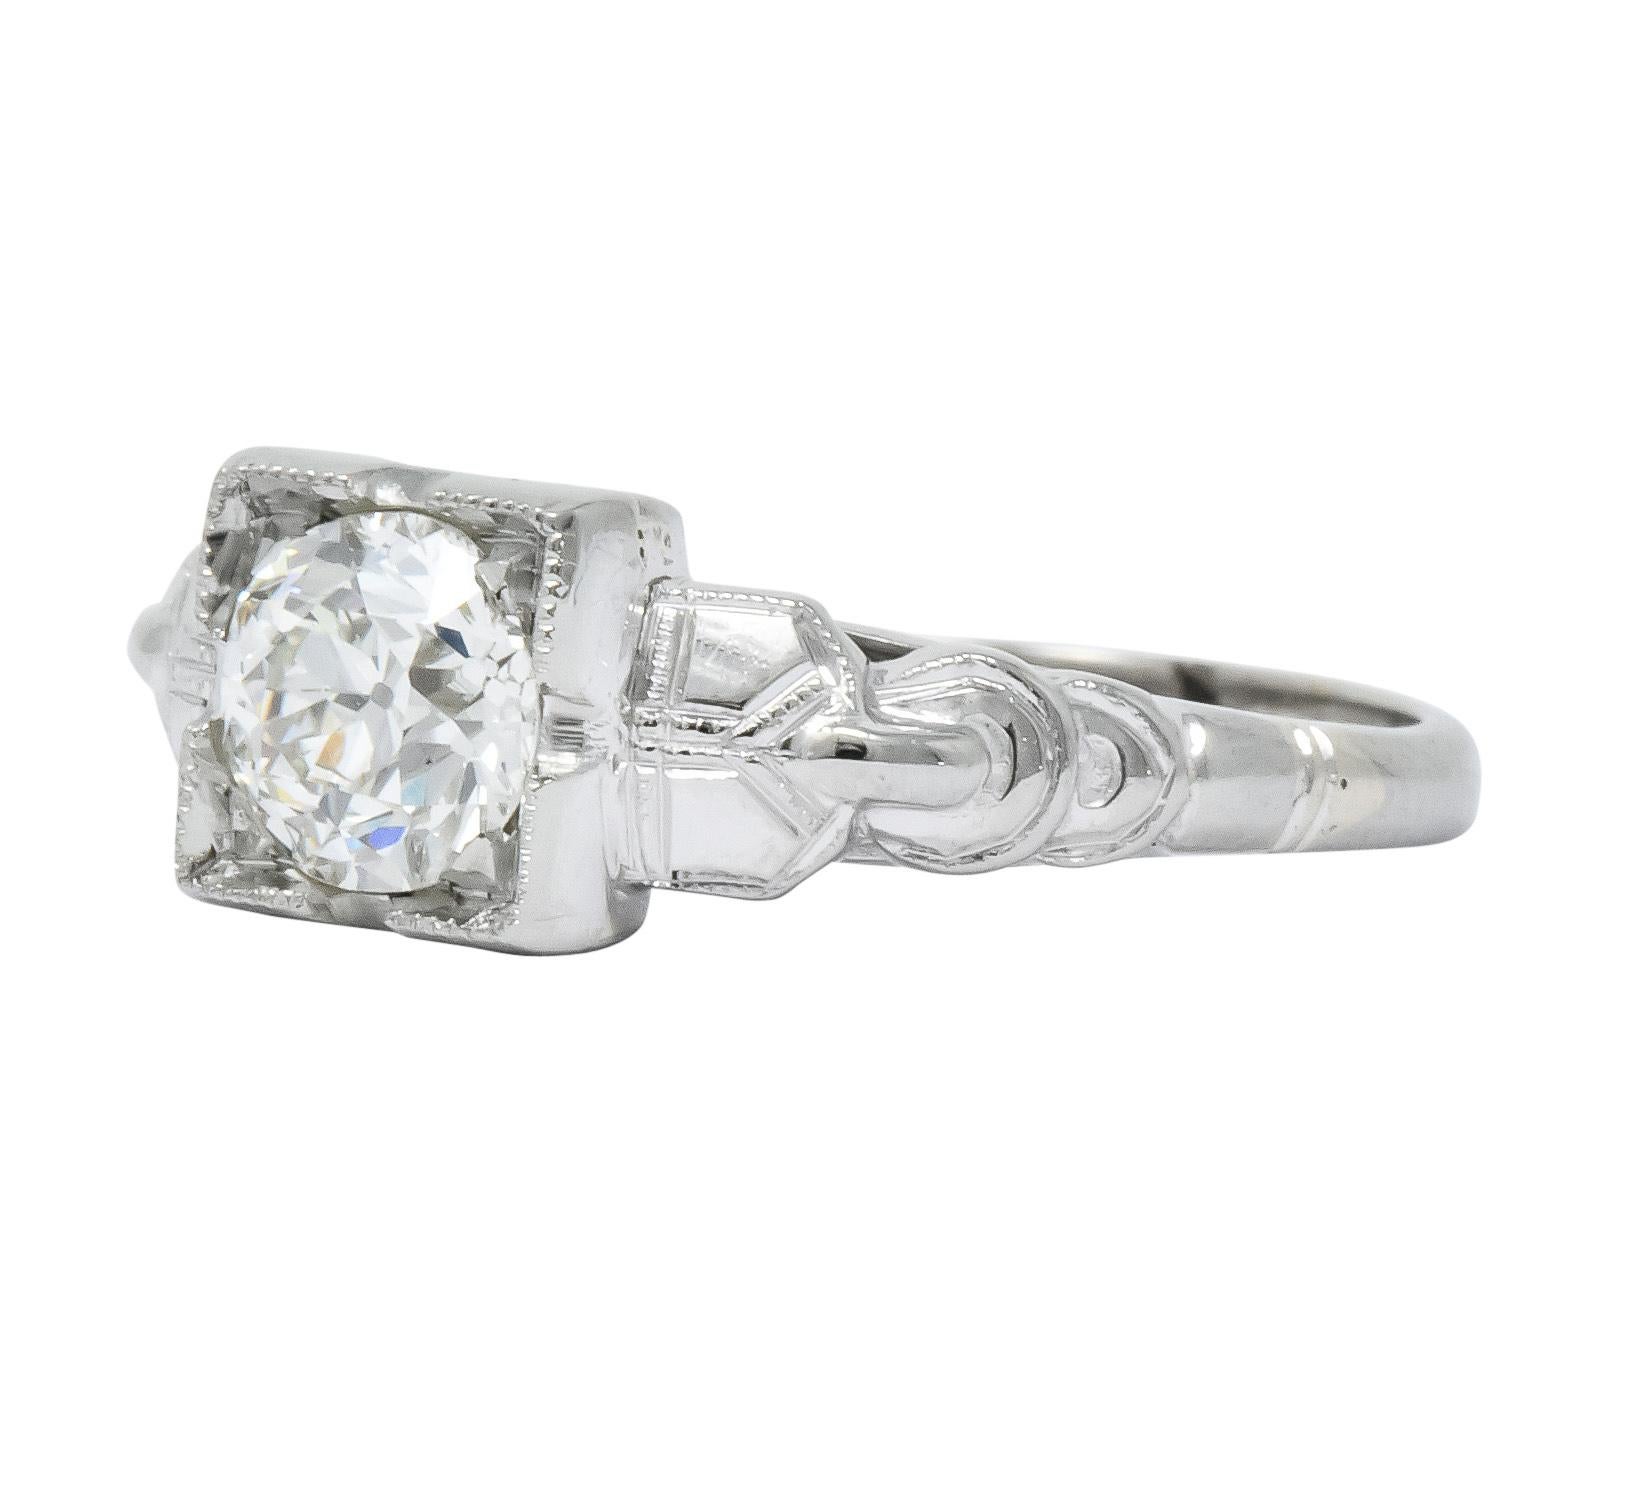 Centering an old European cut diamond weighing 0.64 carat total, J color and SI1 clarity

Square form head with engraved gold details

Unusual solitaire style ring

Stamped 14K

Ring Size: 5 & Sizable

Top measures 6.5 mm and sits 5.5 mm high

Total